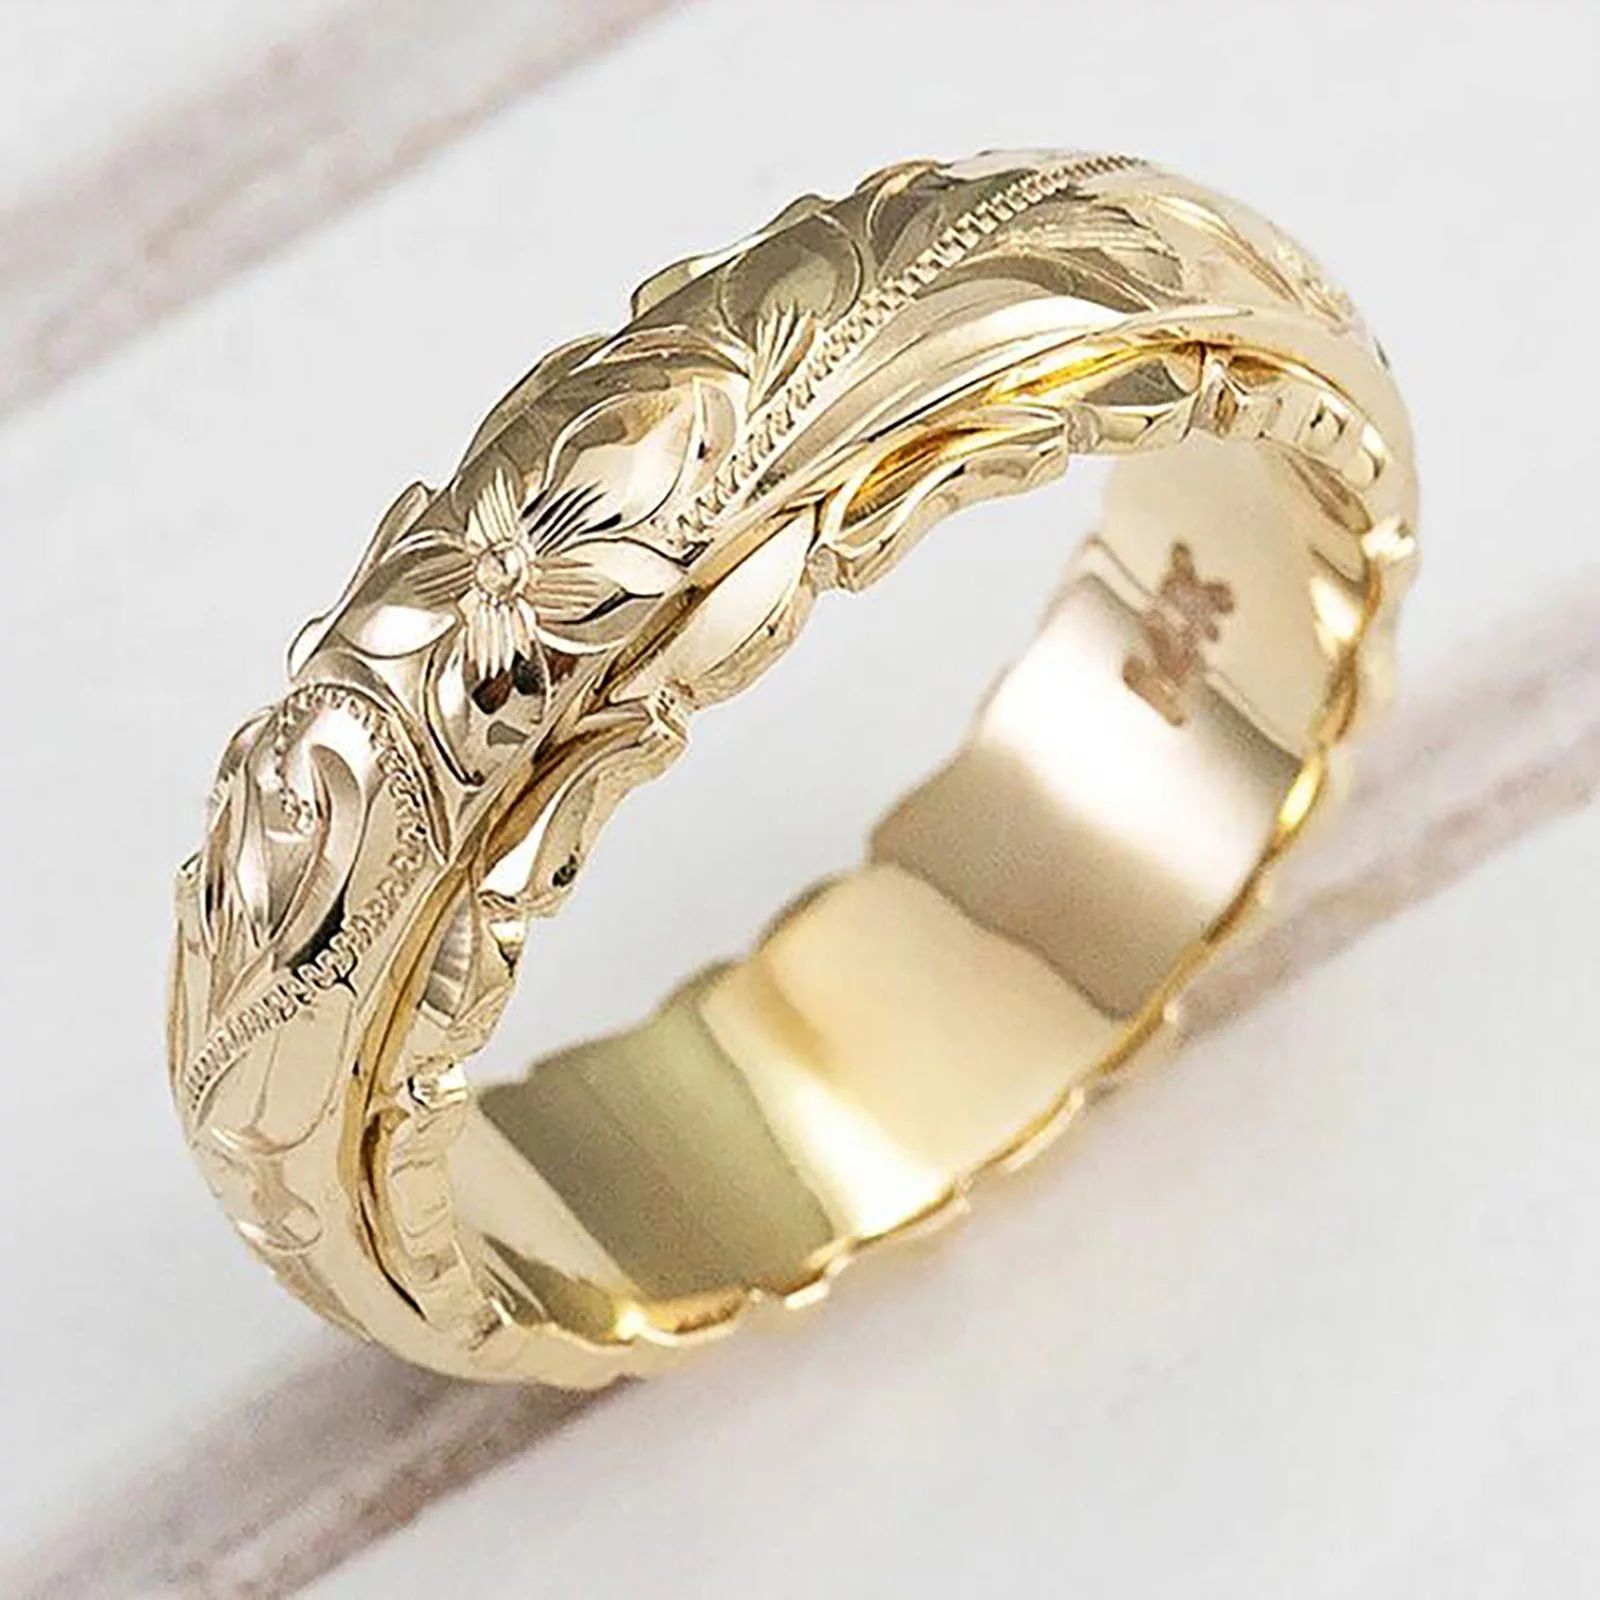 SDJMa 14k Solid Gold Ring | 14k Yellow Gold Carved Rose Flower Pattern Stackable Rings for Women ... | Walmart (US)